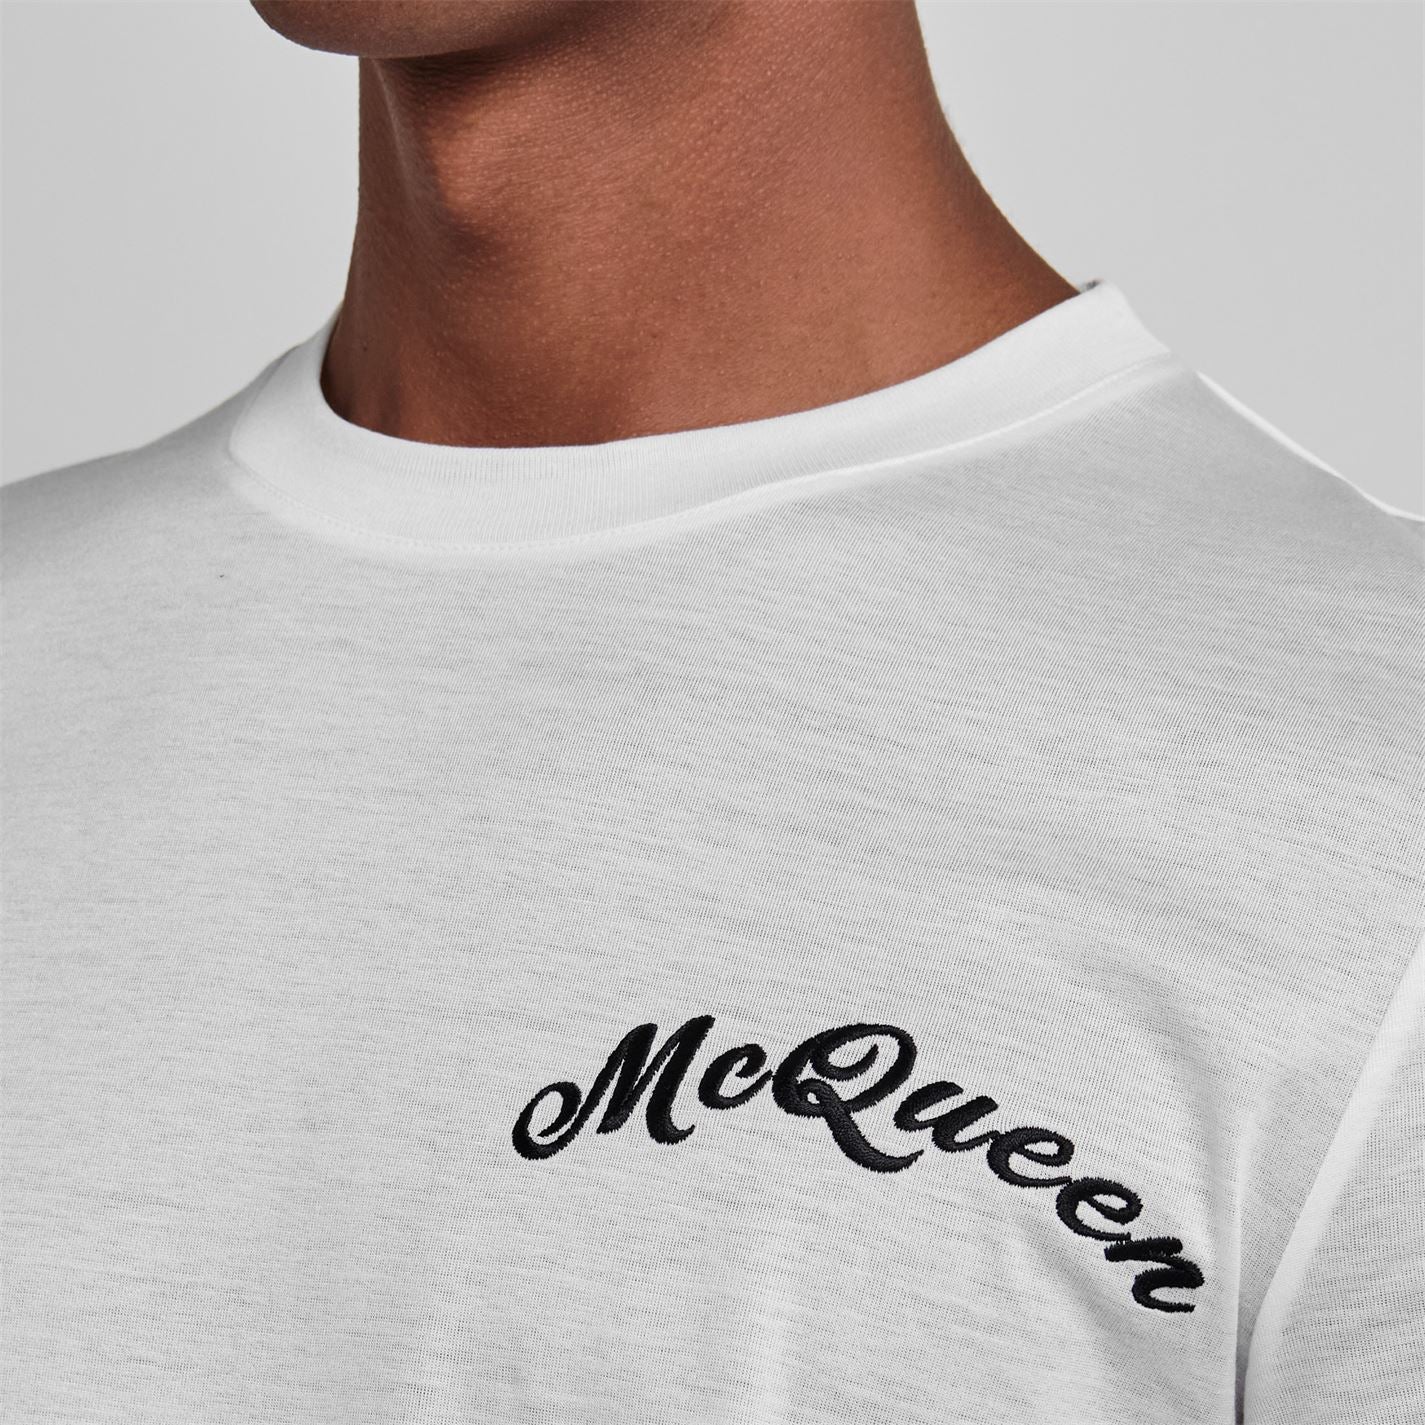 Alexander McQueen White Embroidered T-Shirt - DANYOUNGUK